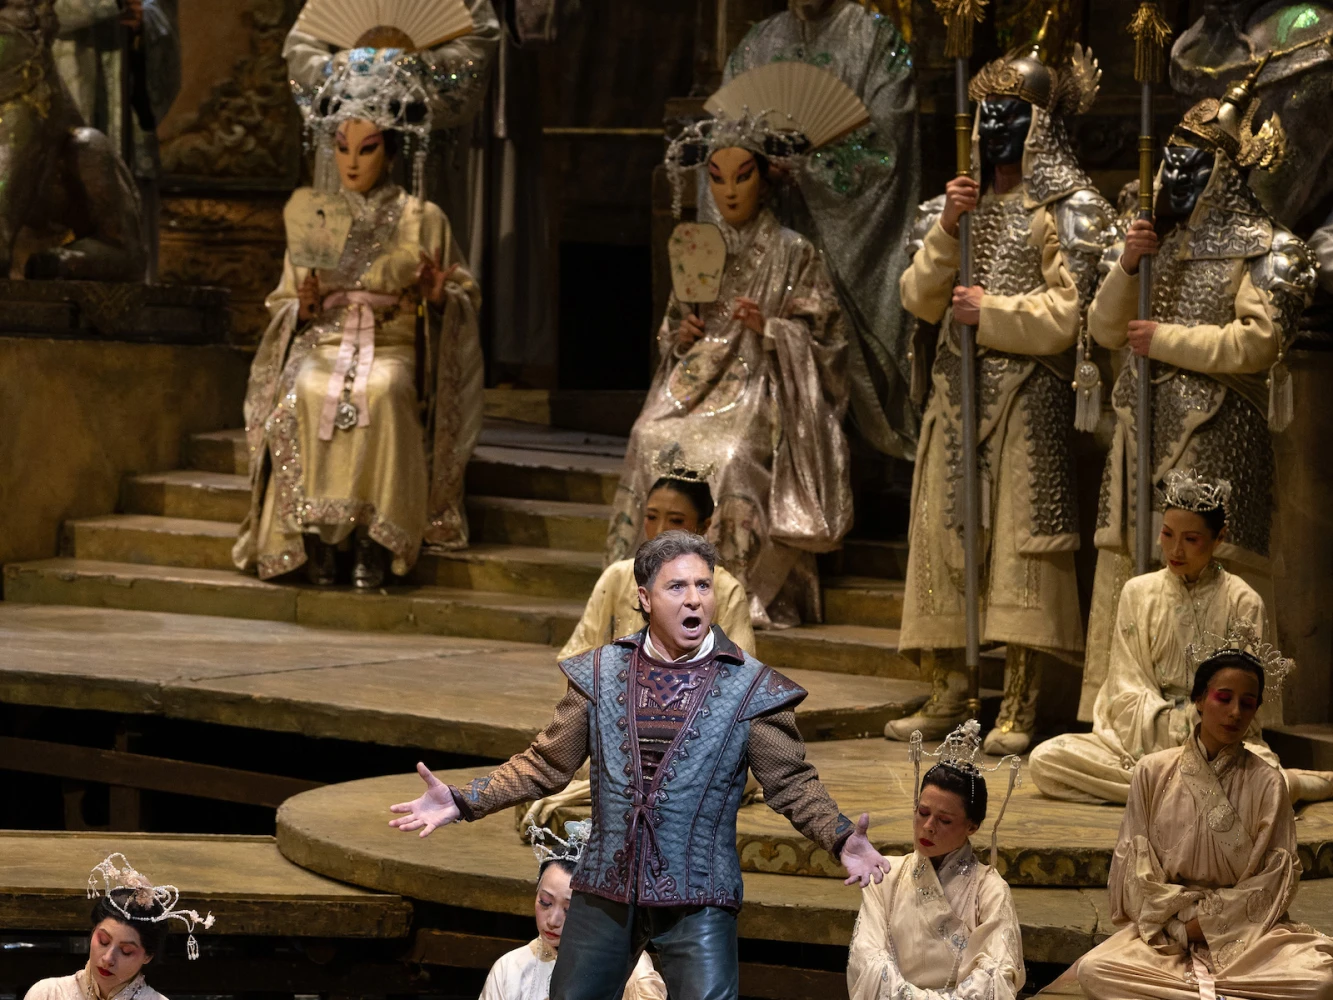 Puccini's Turandot: What to expect - 6